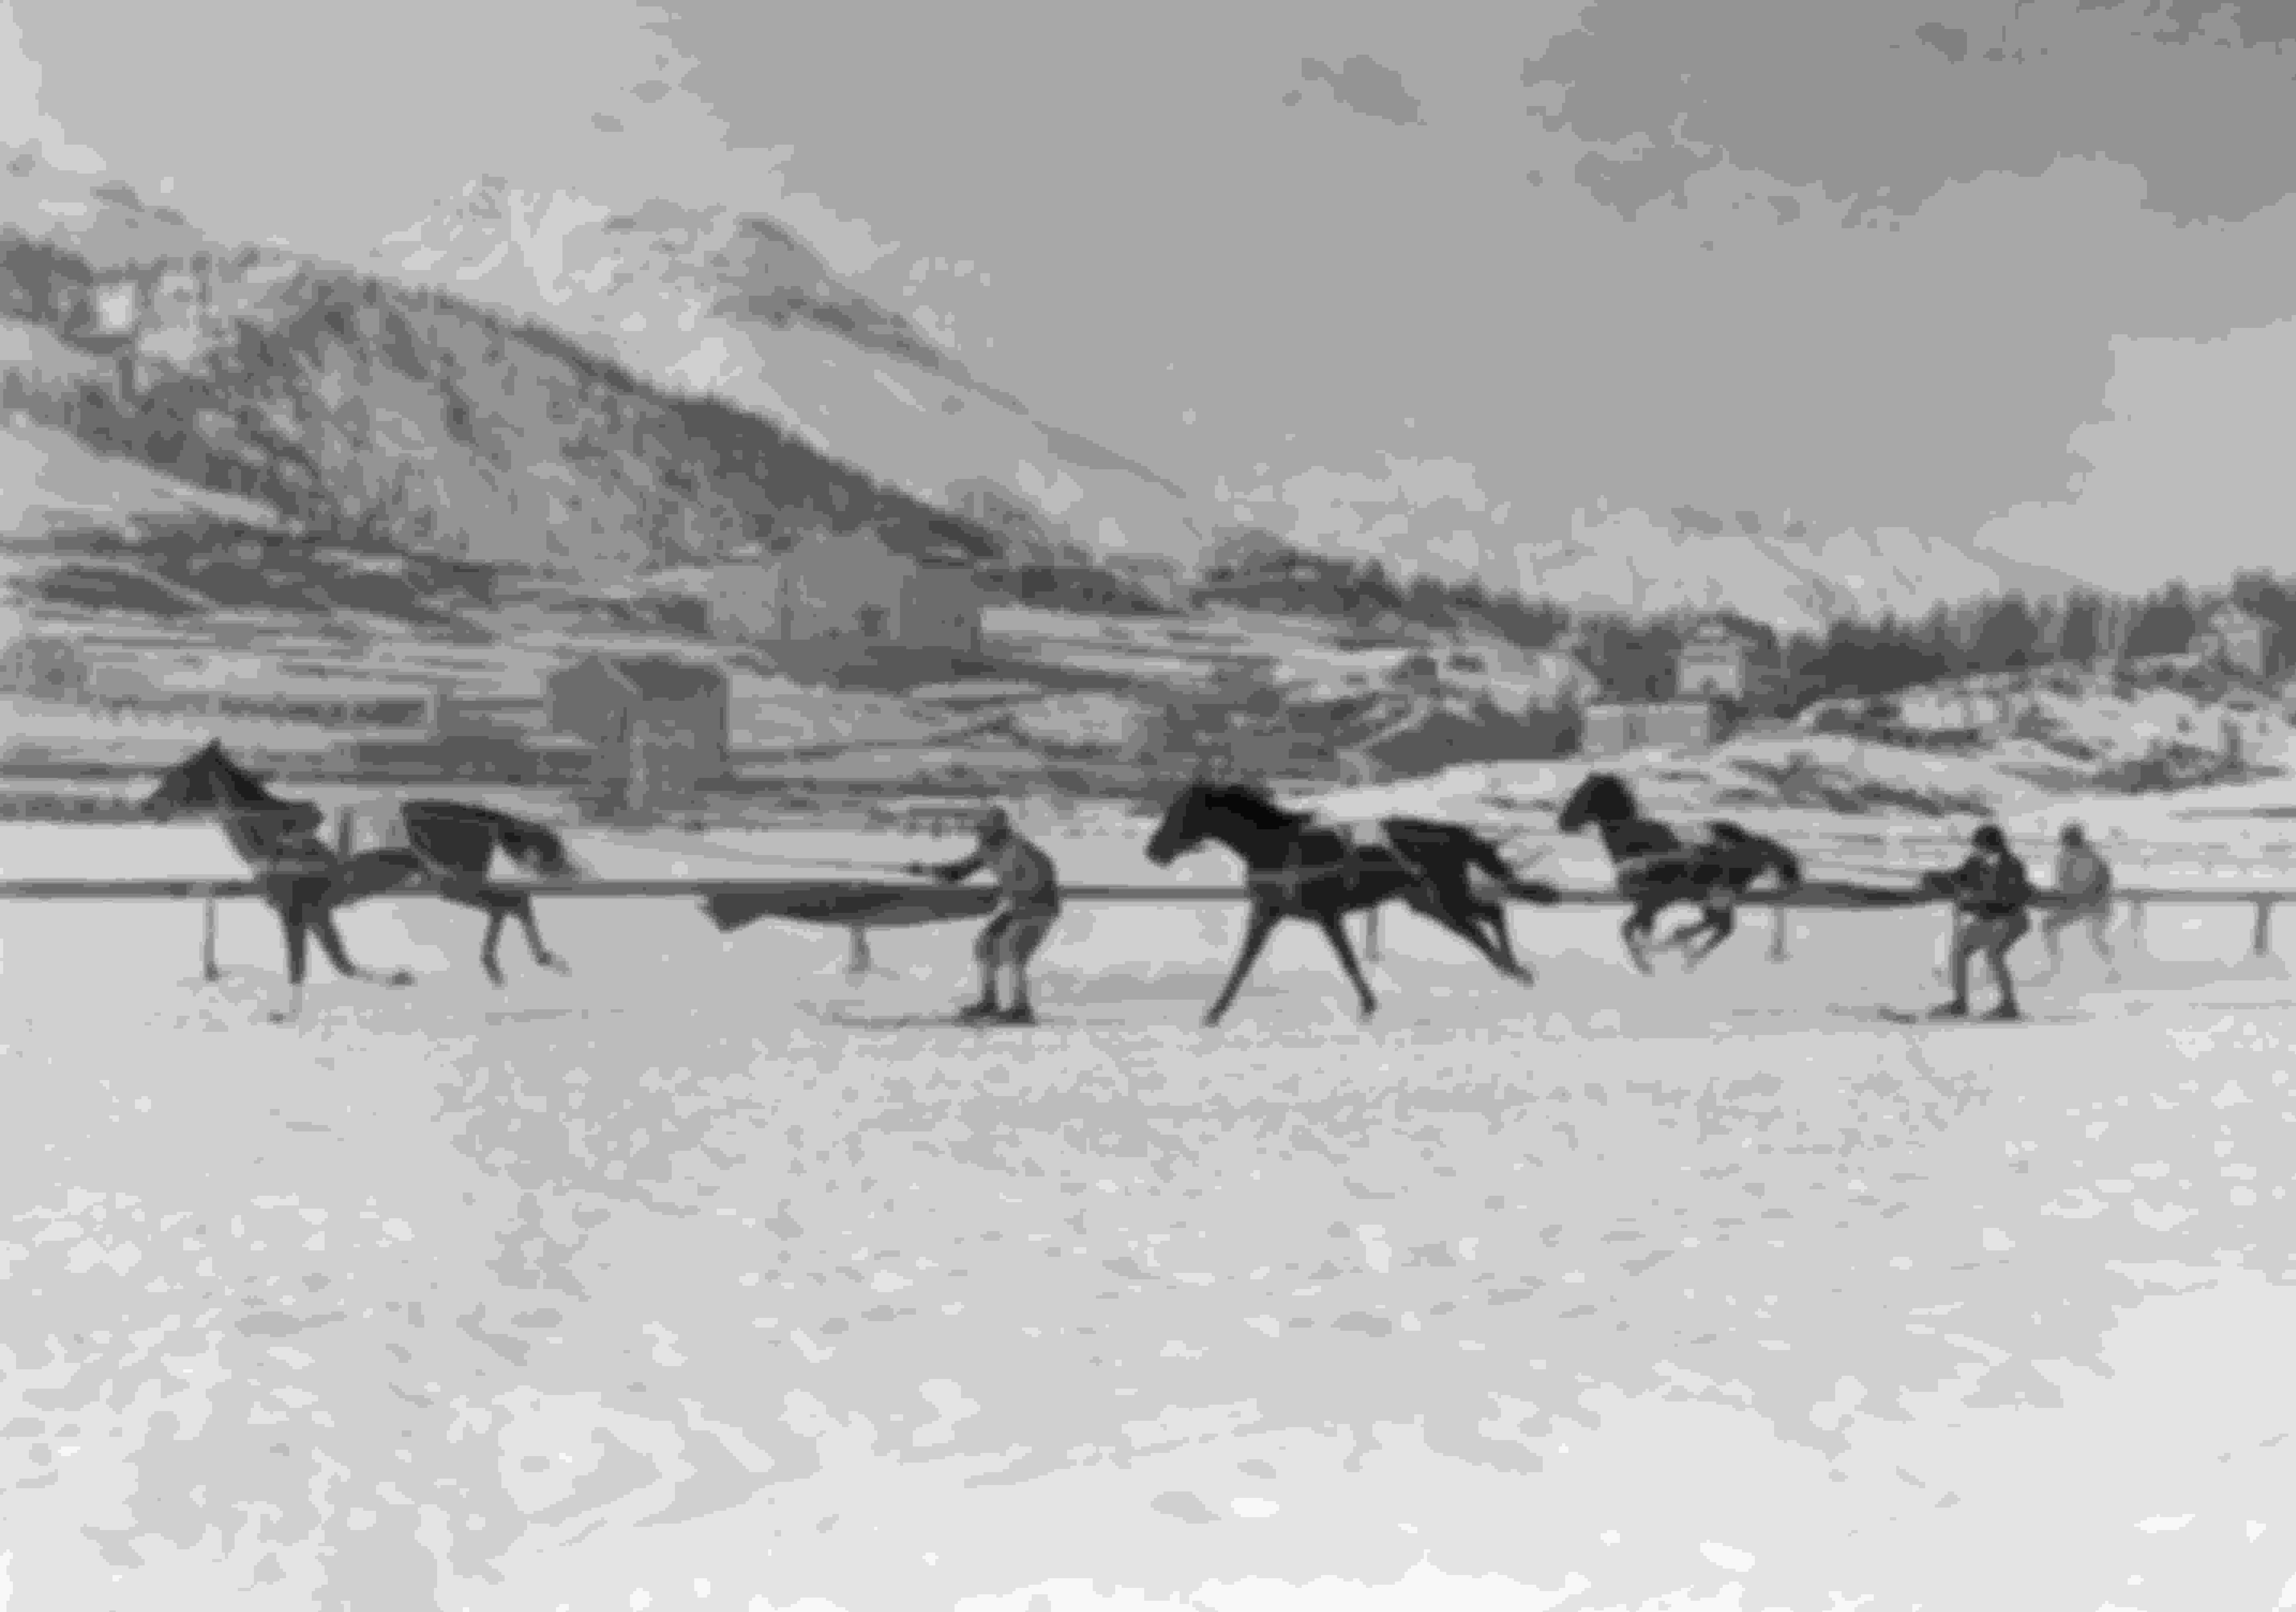 Athletes take part in Skijoring, the exhibition event featured at the St. Moritz 1928 Winter Olympics.